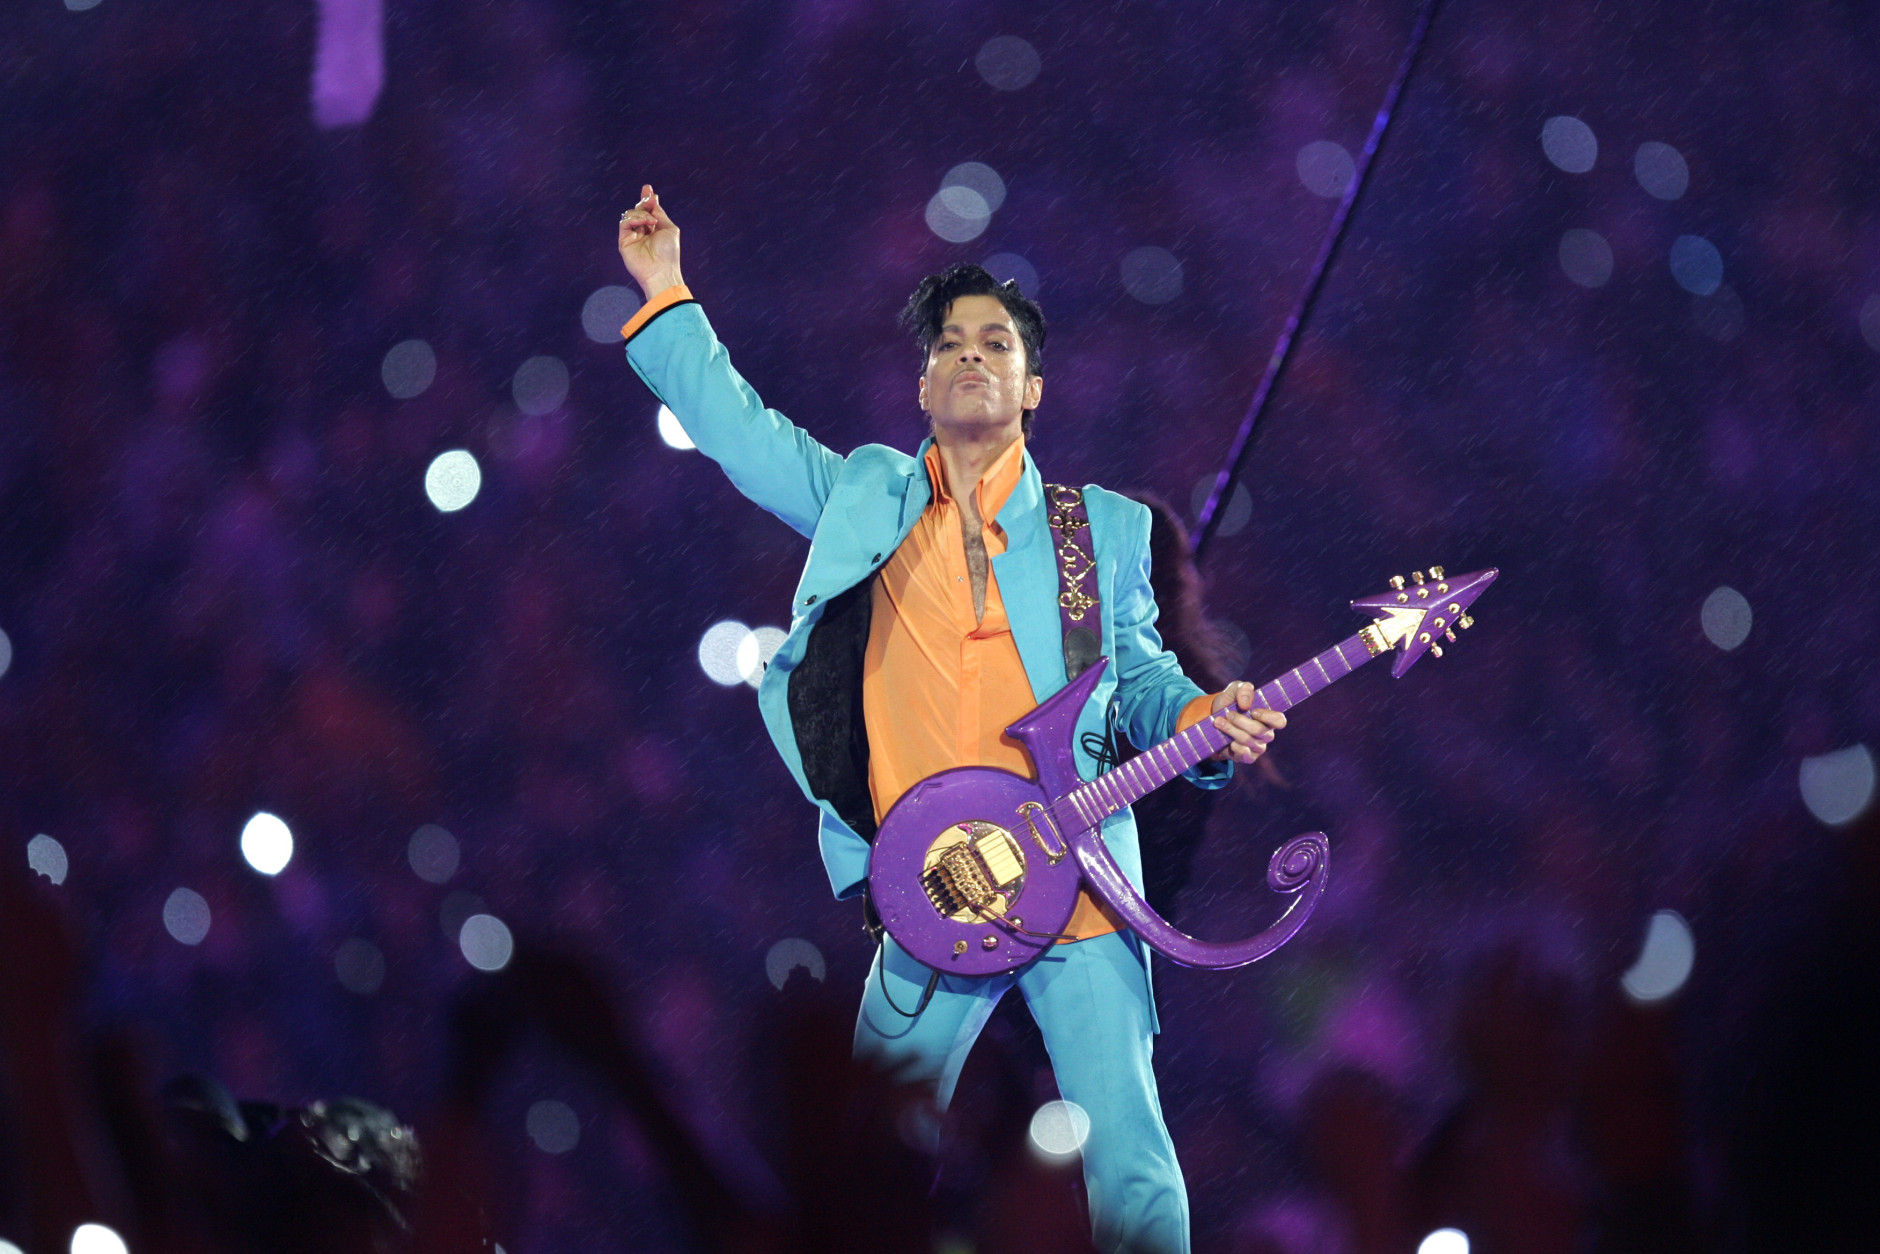 Prince performs during the halftime show at the Super Bowl XLI football game at Dolphin Stadium in Miami on Sunday, Feb. 4, 2007. (AP Photo/Chris O'Meara)